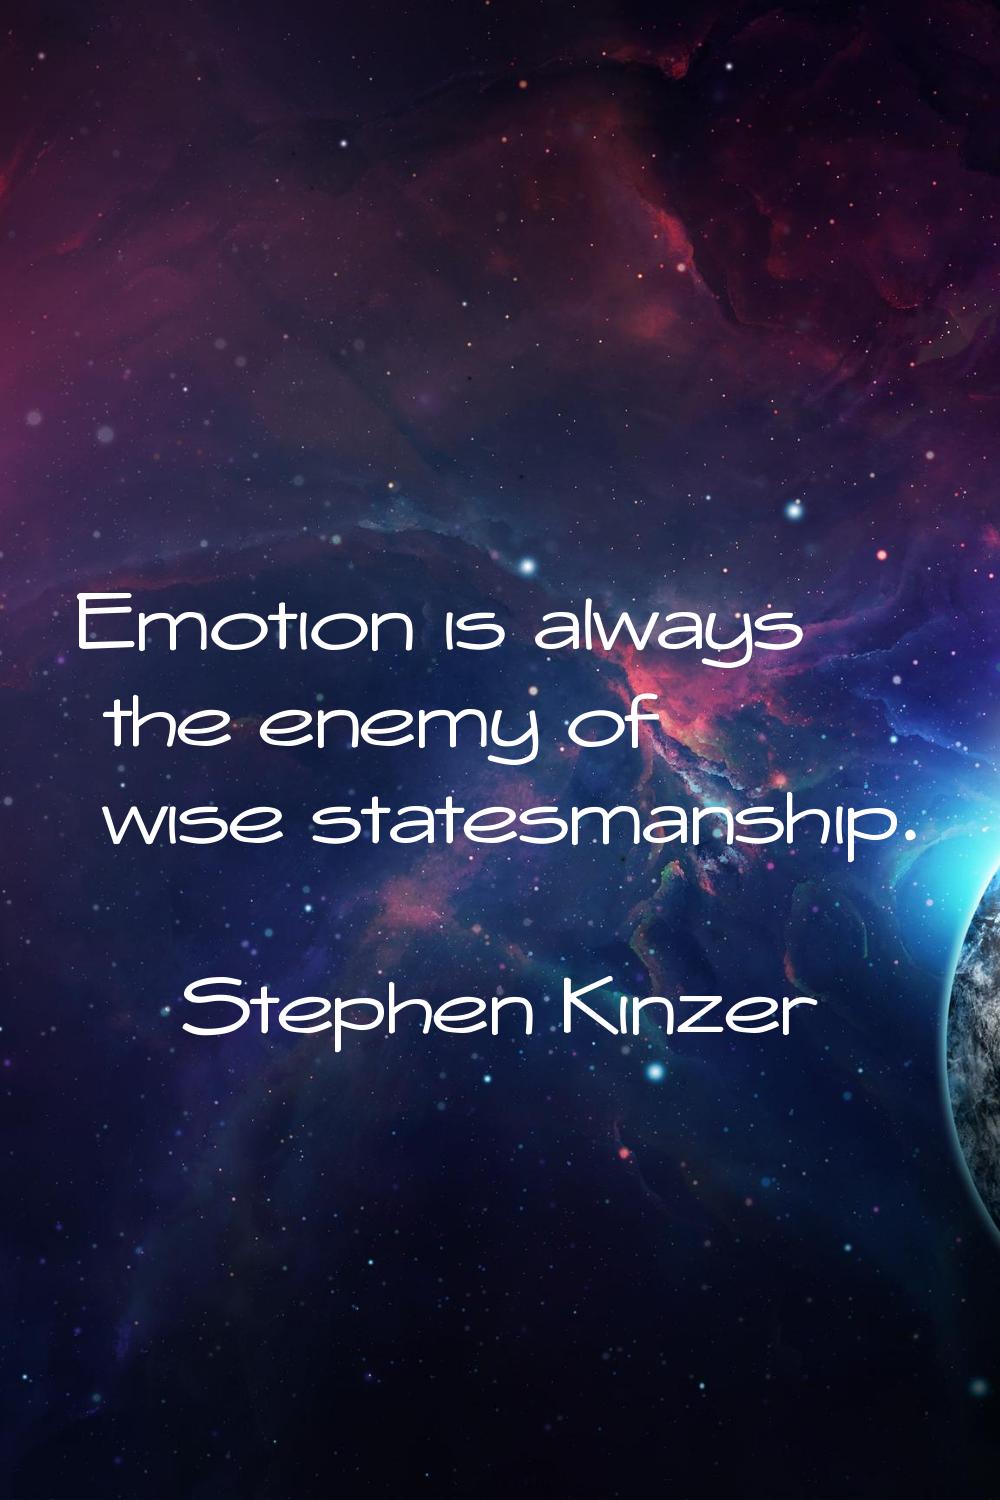 Emotion is always the enemy of wise statesmanship.